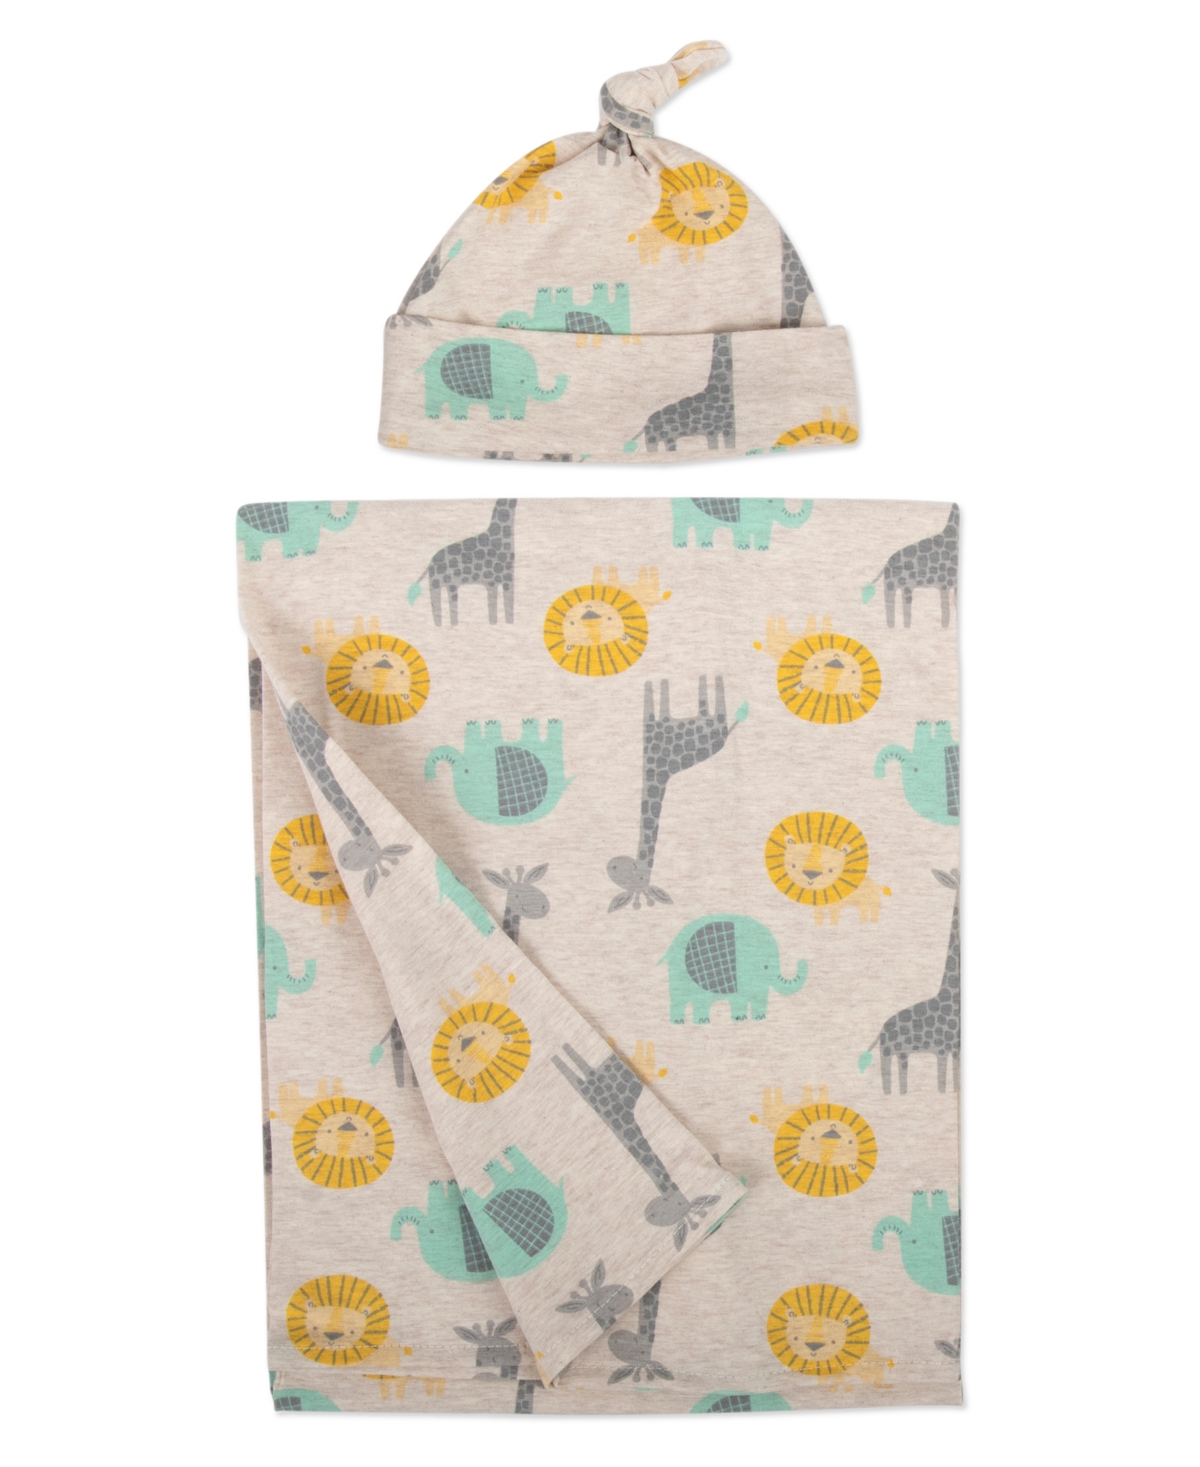 Baby Essentials Baby Boys Soft Giraffe Print Swaddle Wrap Blanket With Matching Hat, 2 Piece Set In Multi